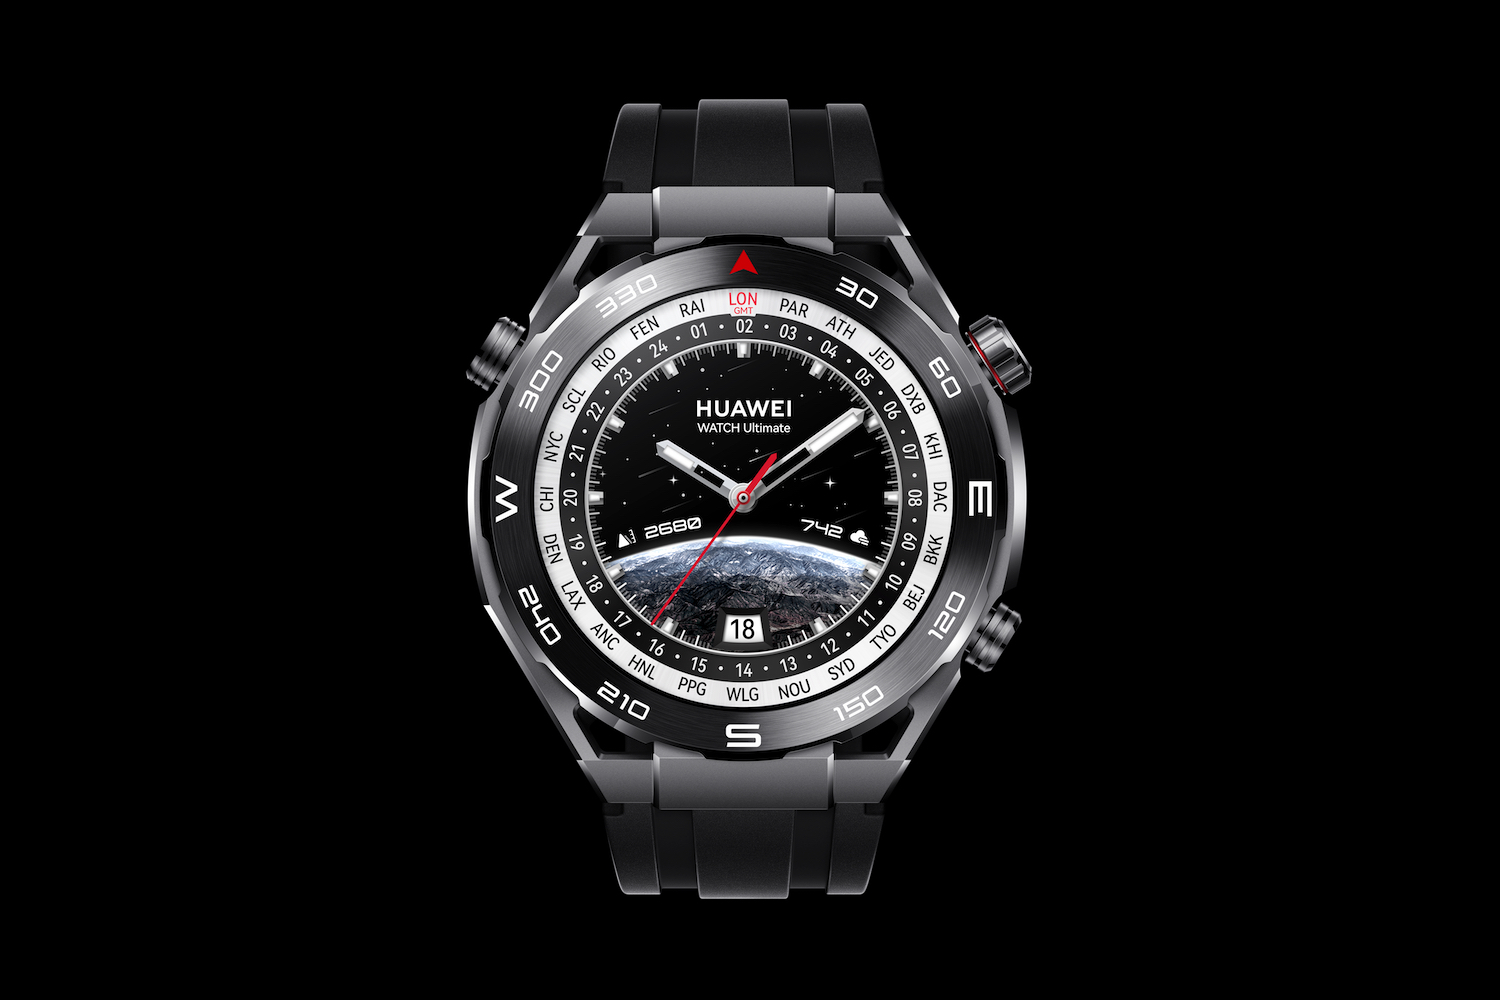 O Huawei Watch Ultimate em Expedition Black.